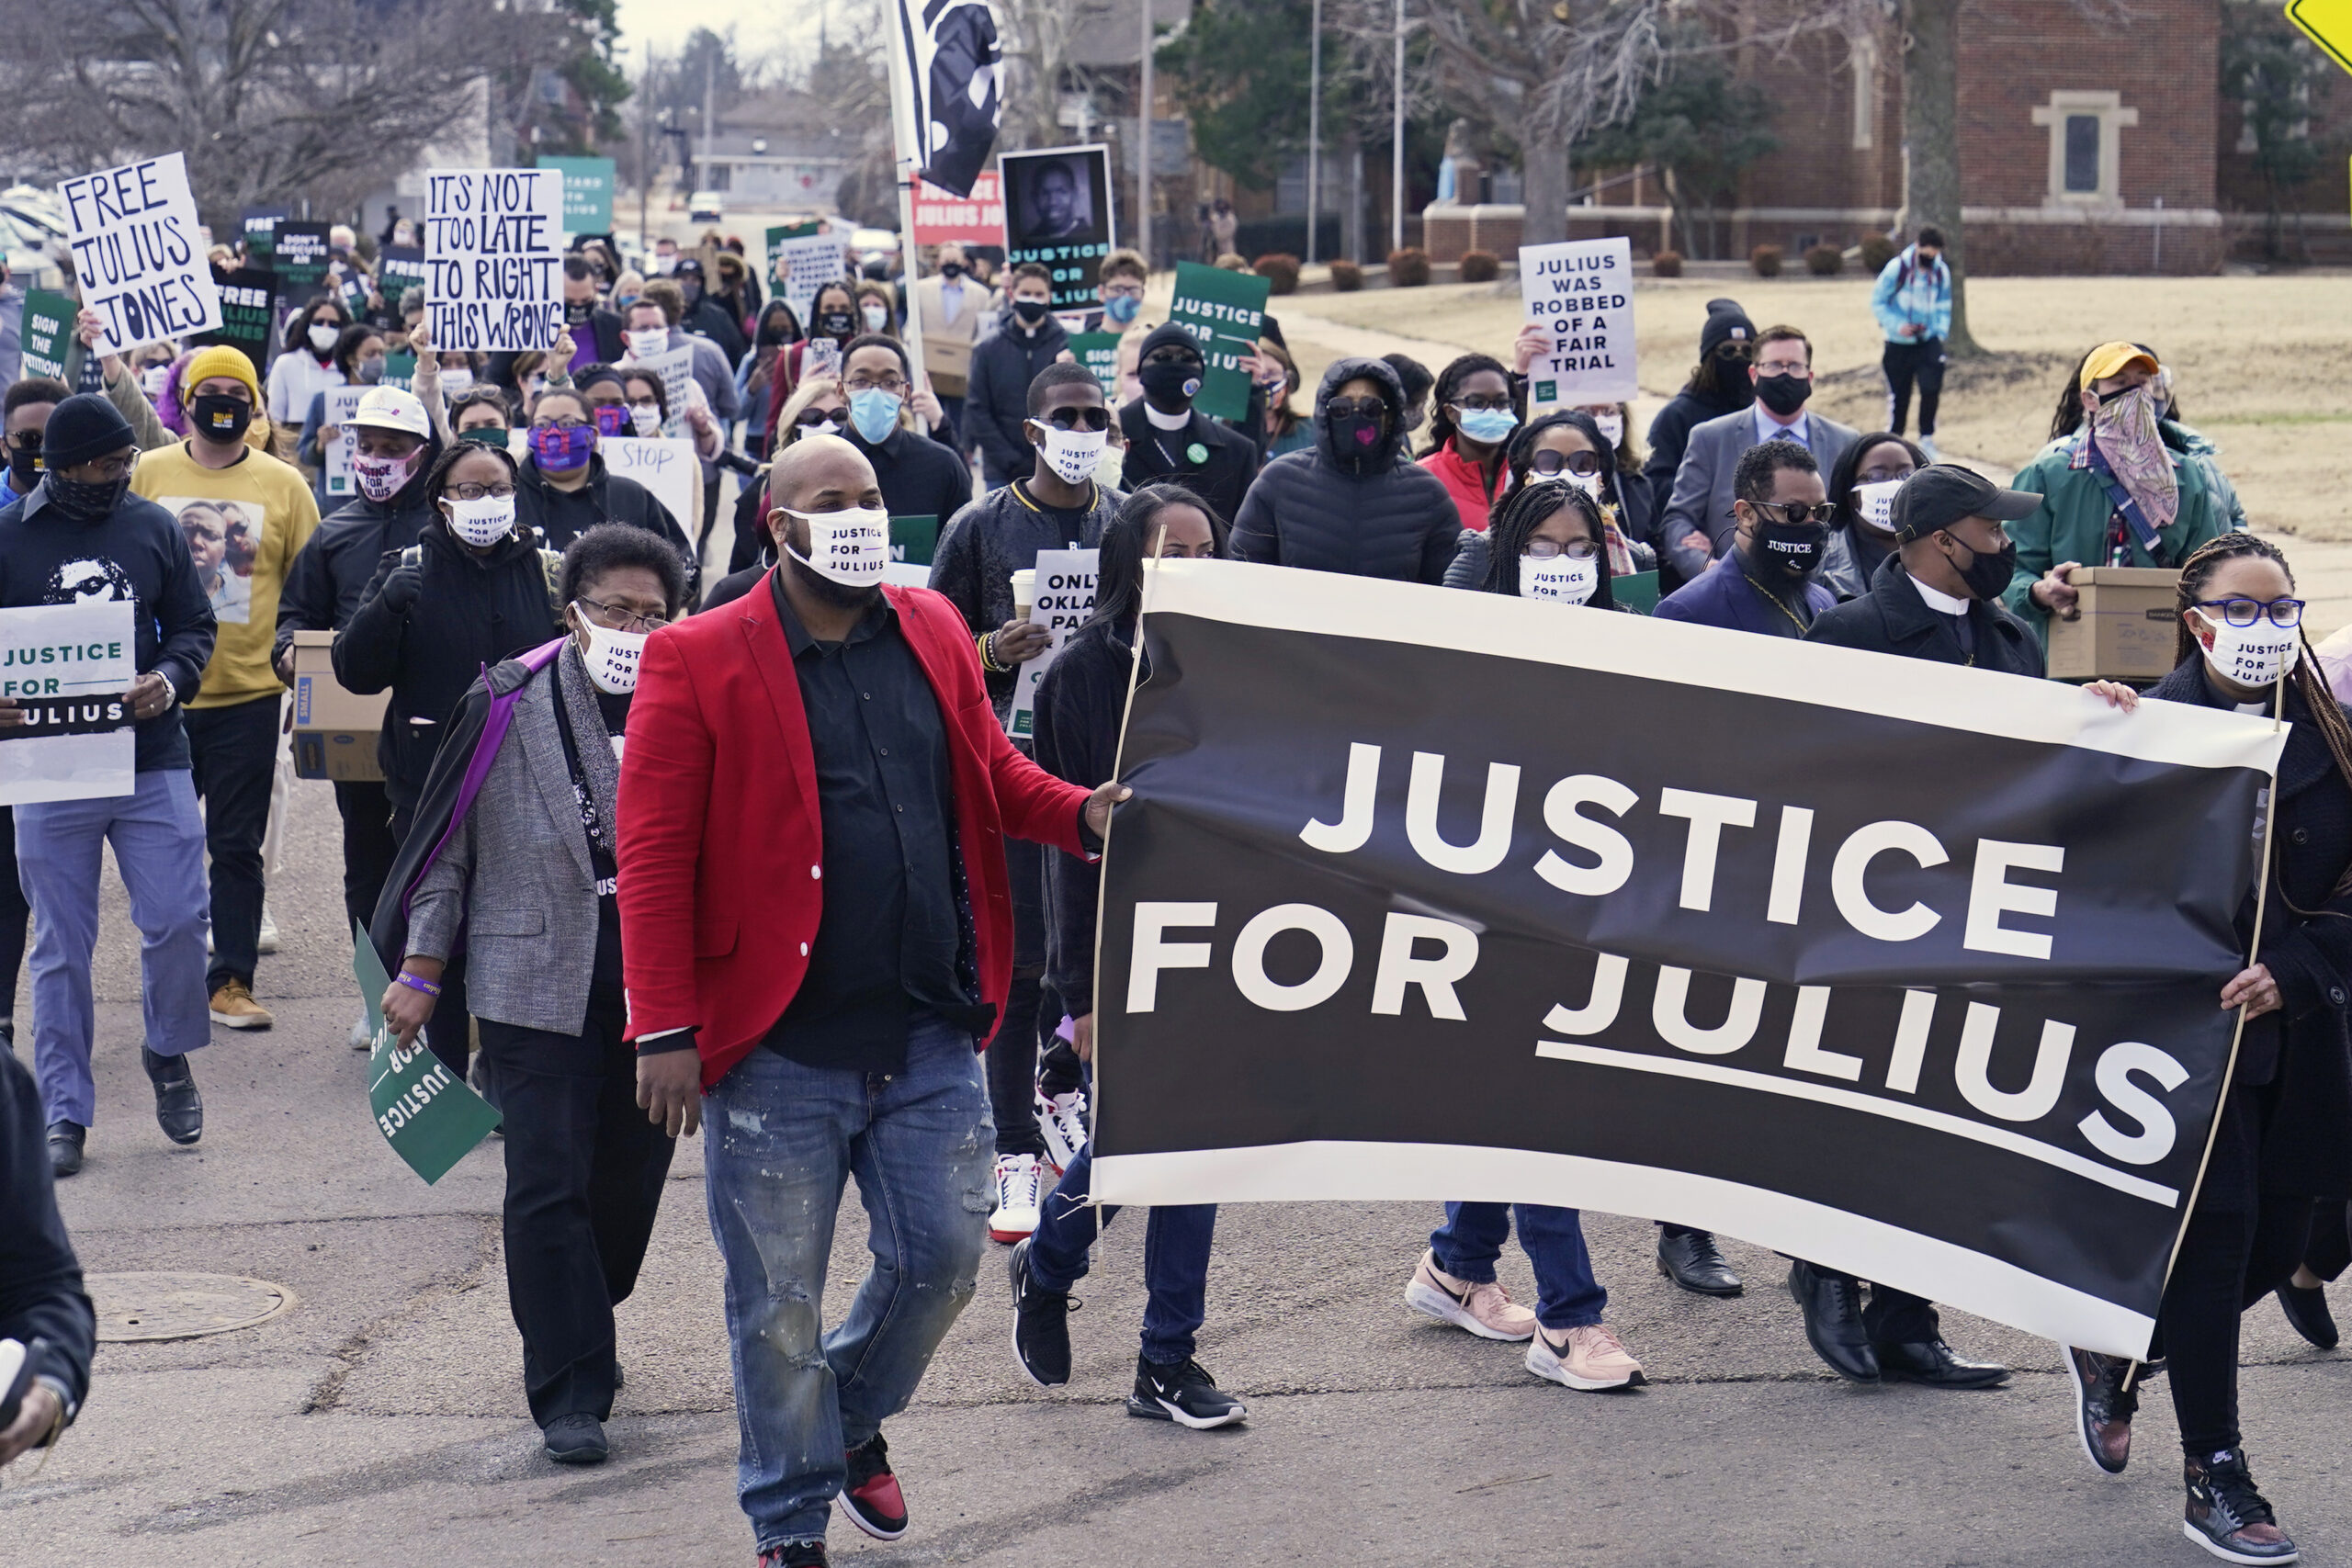 Supporters of Julius Jones, who has been on death row in Oklahoma since 1999, march to the offices of the Oklahoma Pardon and Parole Board, Thursday, Feb. 25, 2021, in Oklahoma City, where they presented a petition with over 6.2 million signatures, calling for Jones' death sentence to be commuted. (Image: AP Photo/Sue Ogrocki)